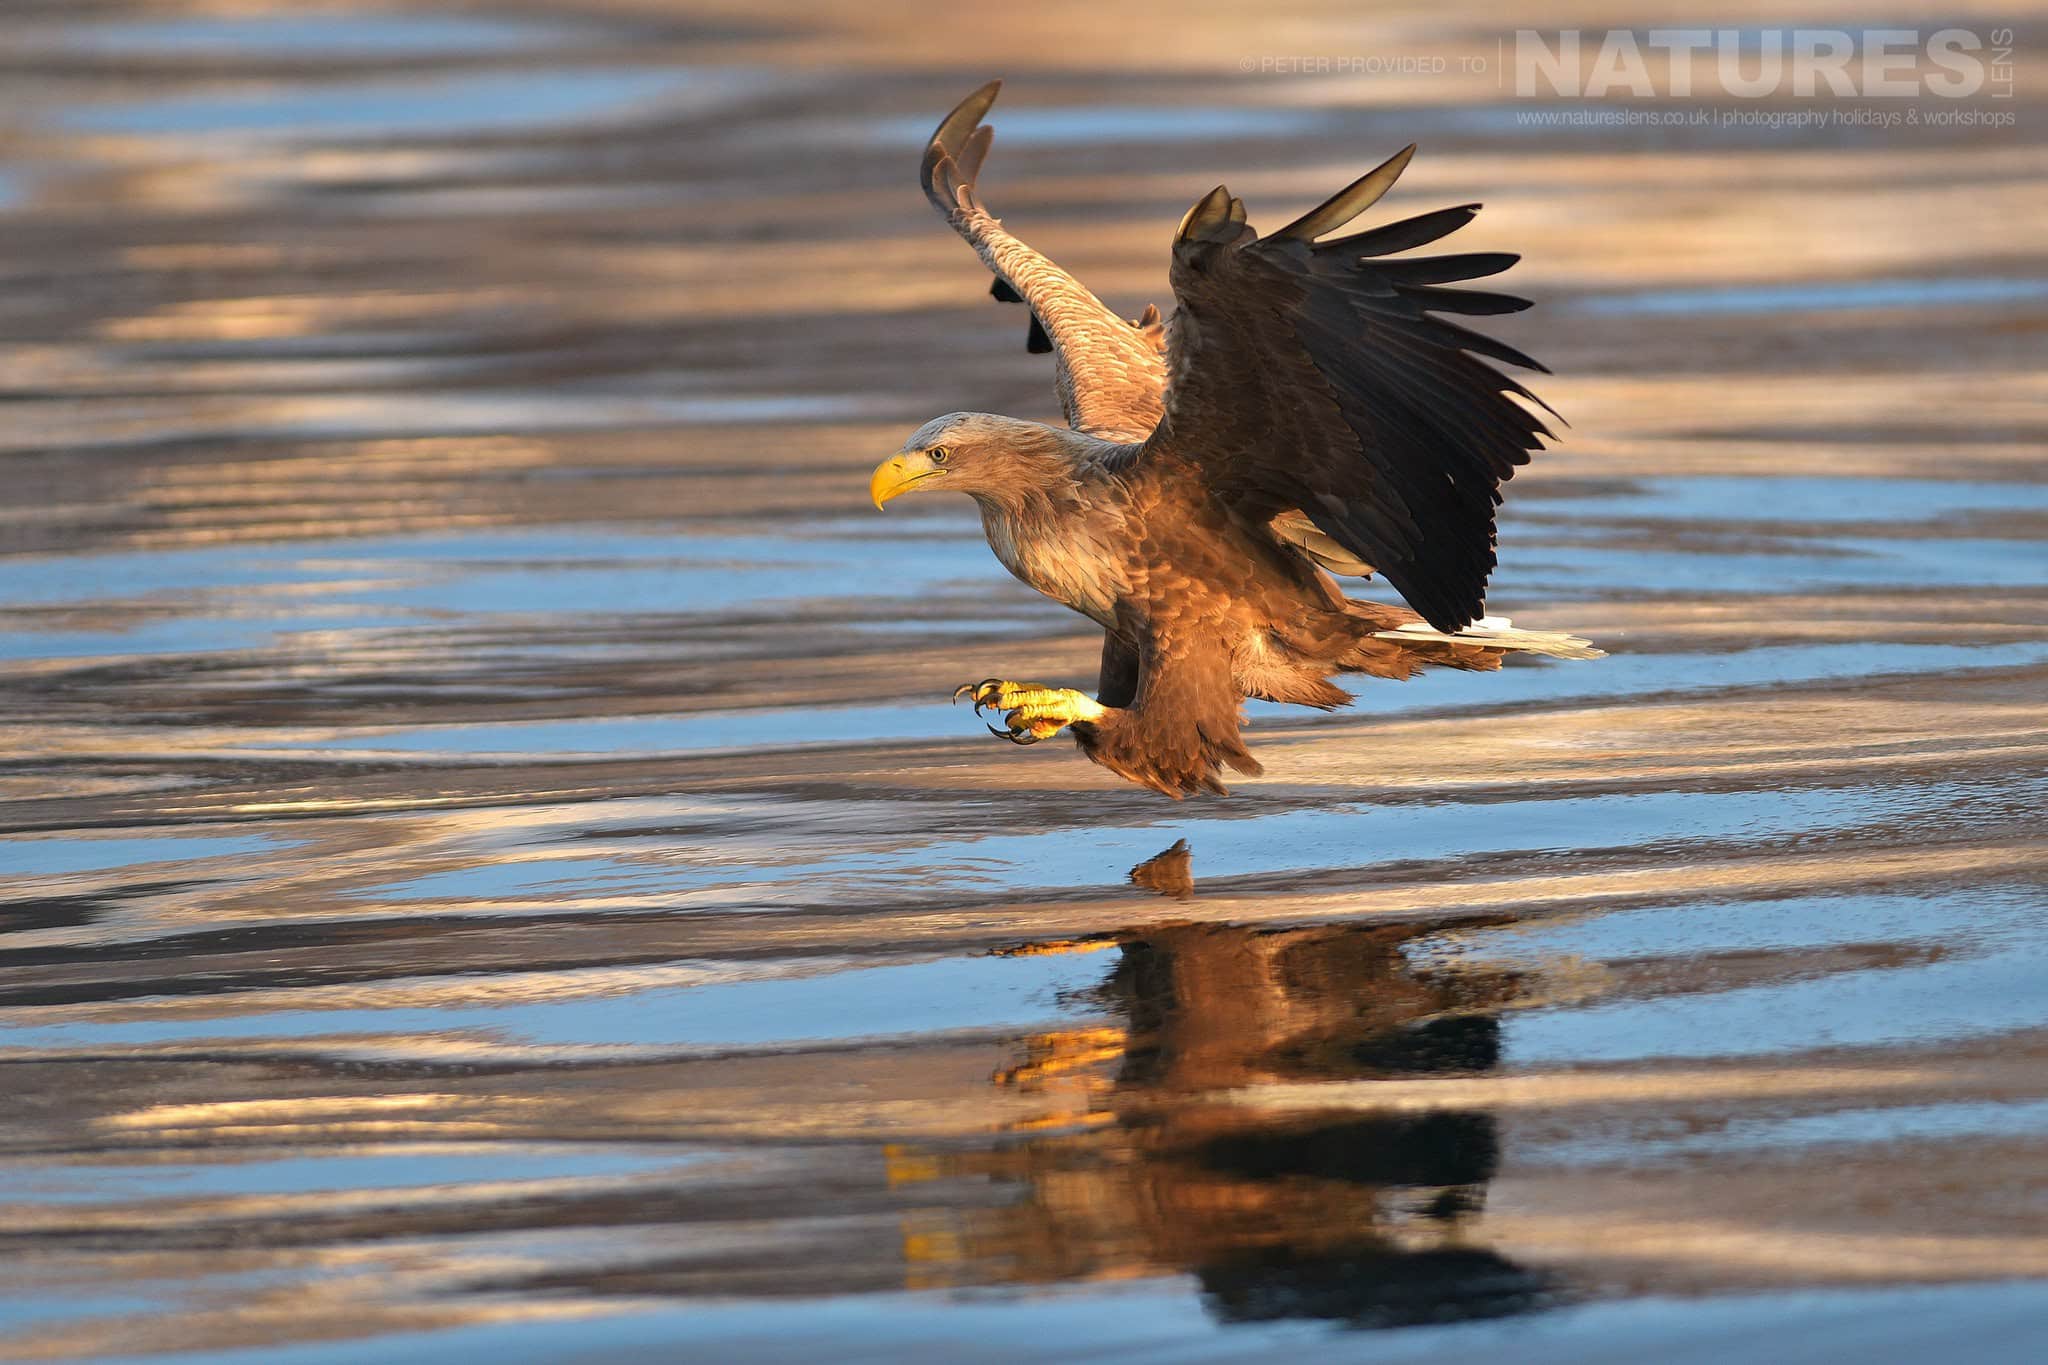 A White Tailed Sea Eagle Attempts To Grab A Fish From The Rausu Seas This Image Was Captured On The Island Of Hokkaido During The Natureslens Winter Wildlife Of Japan Photography Holiday